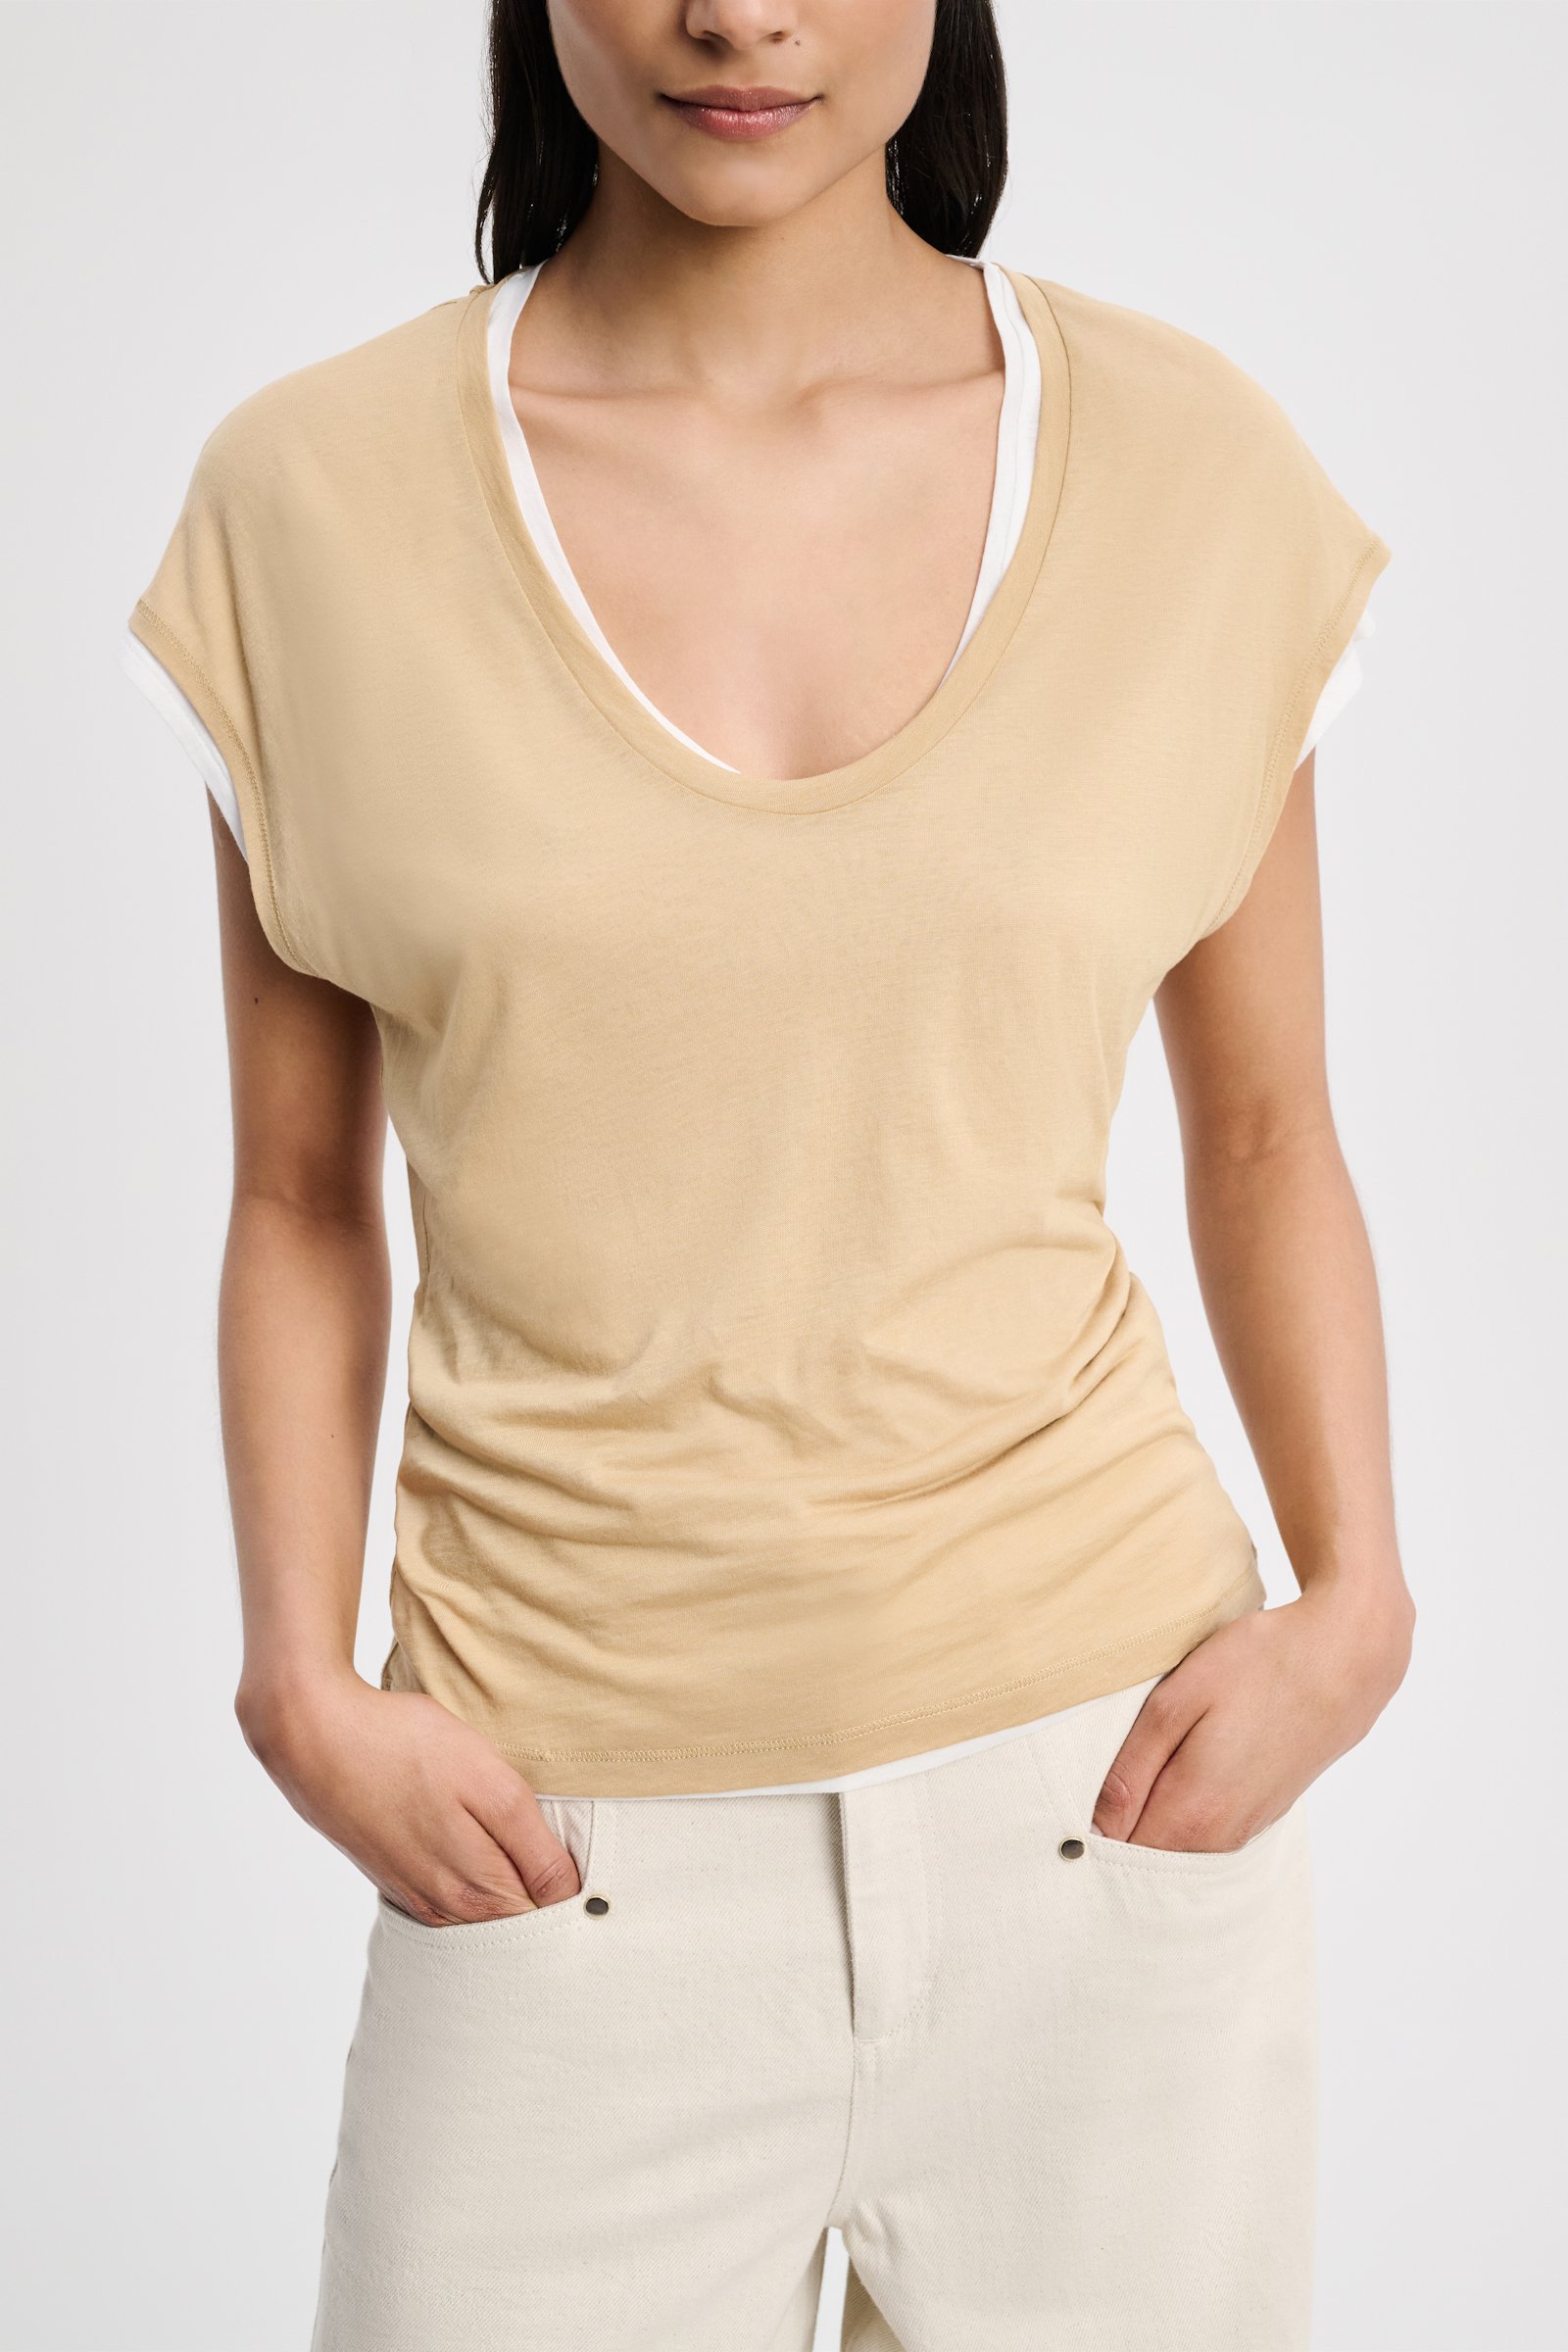 Dorothee Schumacher Double-layer sleeveless top with draped shoulders brown and creme mix